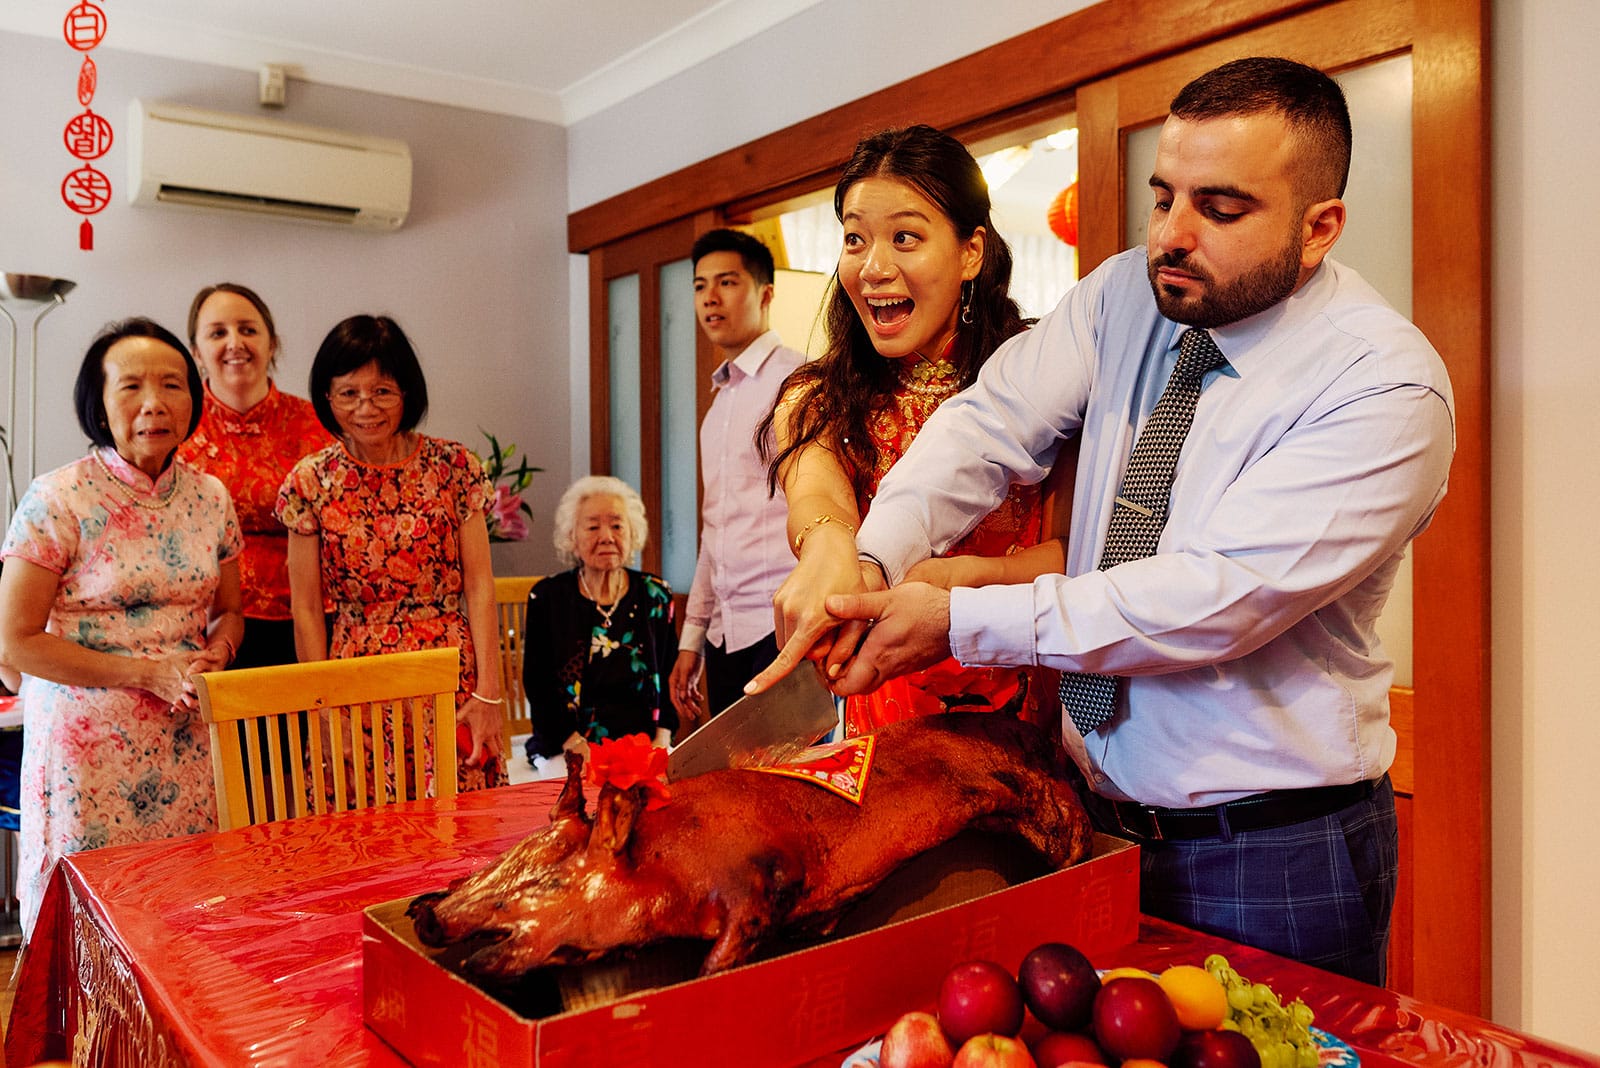 Cutting the pig during the wedding ceremony